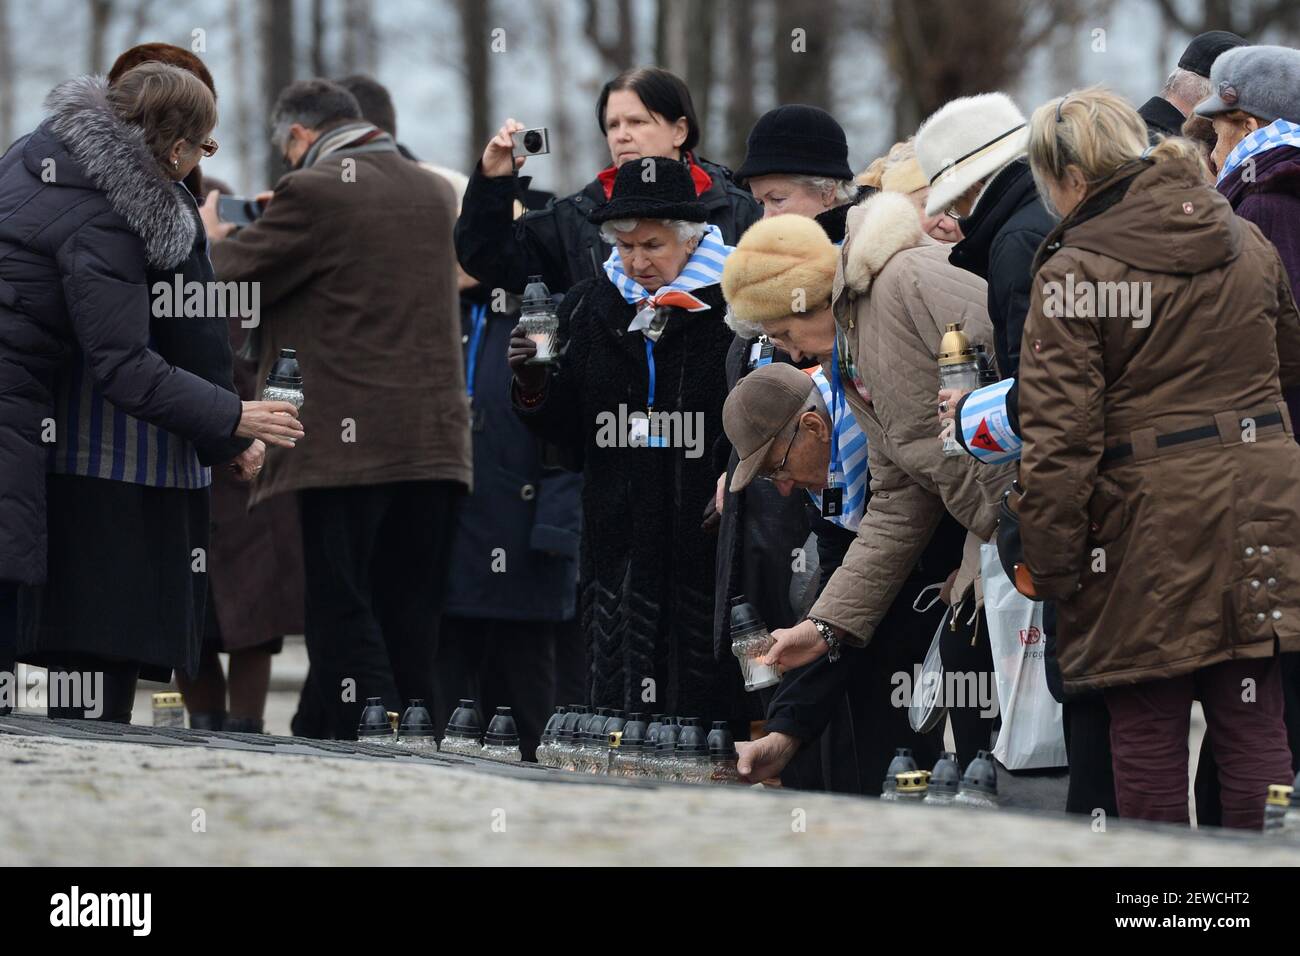 The Auschwitz camp survivers accompanied by their families lay candles at the Victims Monument on the day of the 71st Anniversary of the Liberation of the former Nazi German Concentration and Extermination Camp in Auschwitz-Birkenau.  Brzezinka (Auschwitz-Birkenau) camp, Oswiecim, Poland. On 27 January 2016. Stock Photo